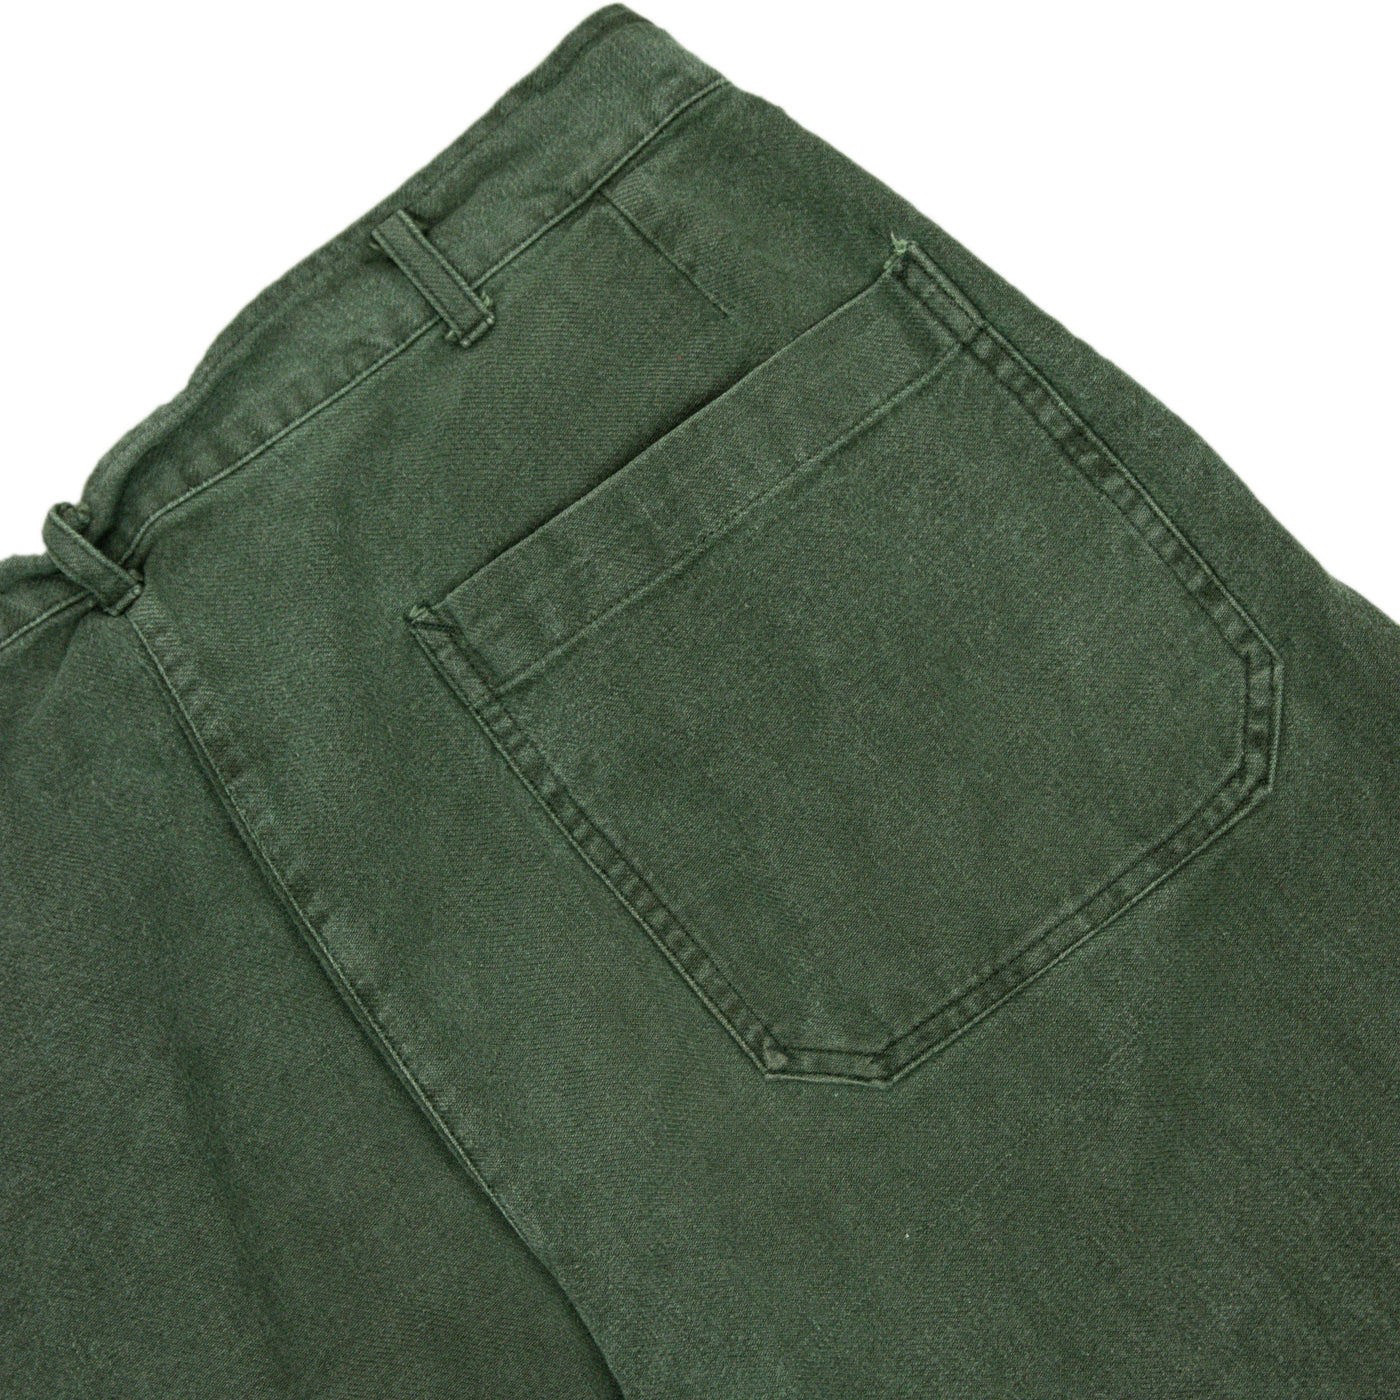 Vintage 70s Distressed Swedish Military Field Trousers Worker Style Green 30 W back detail